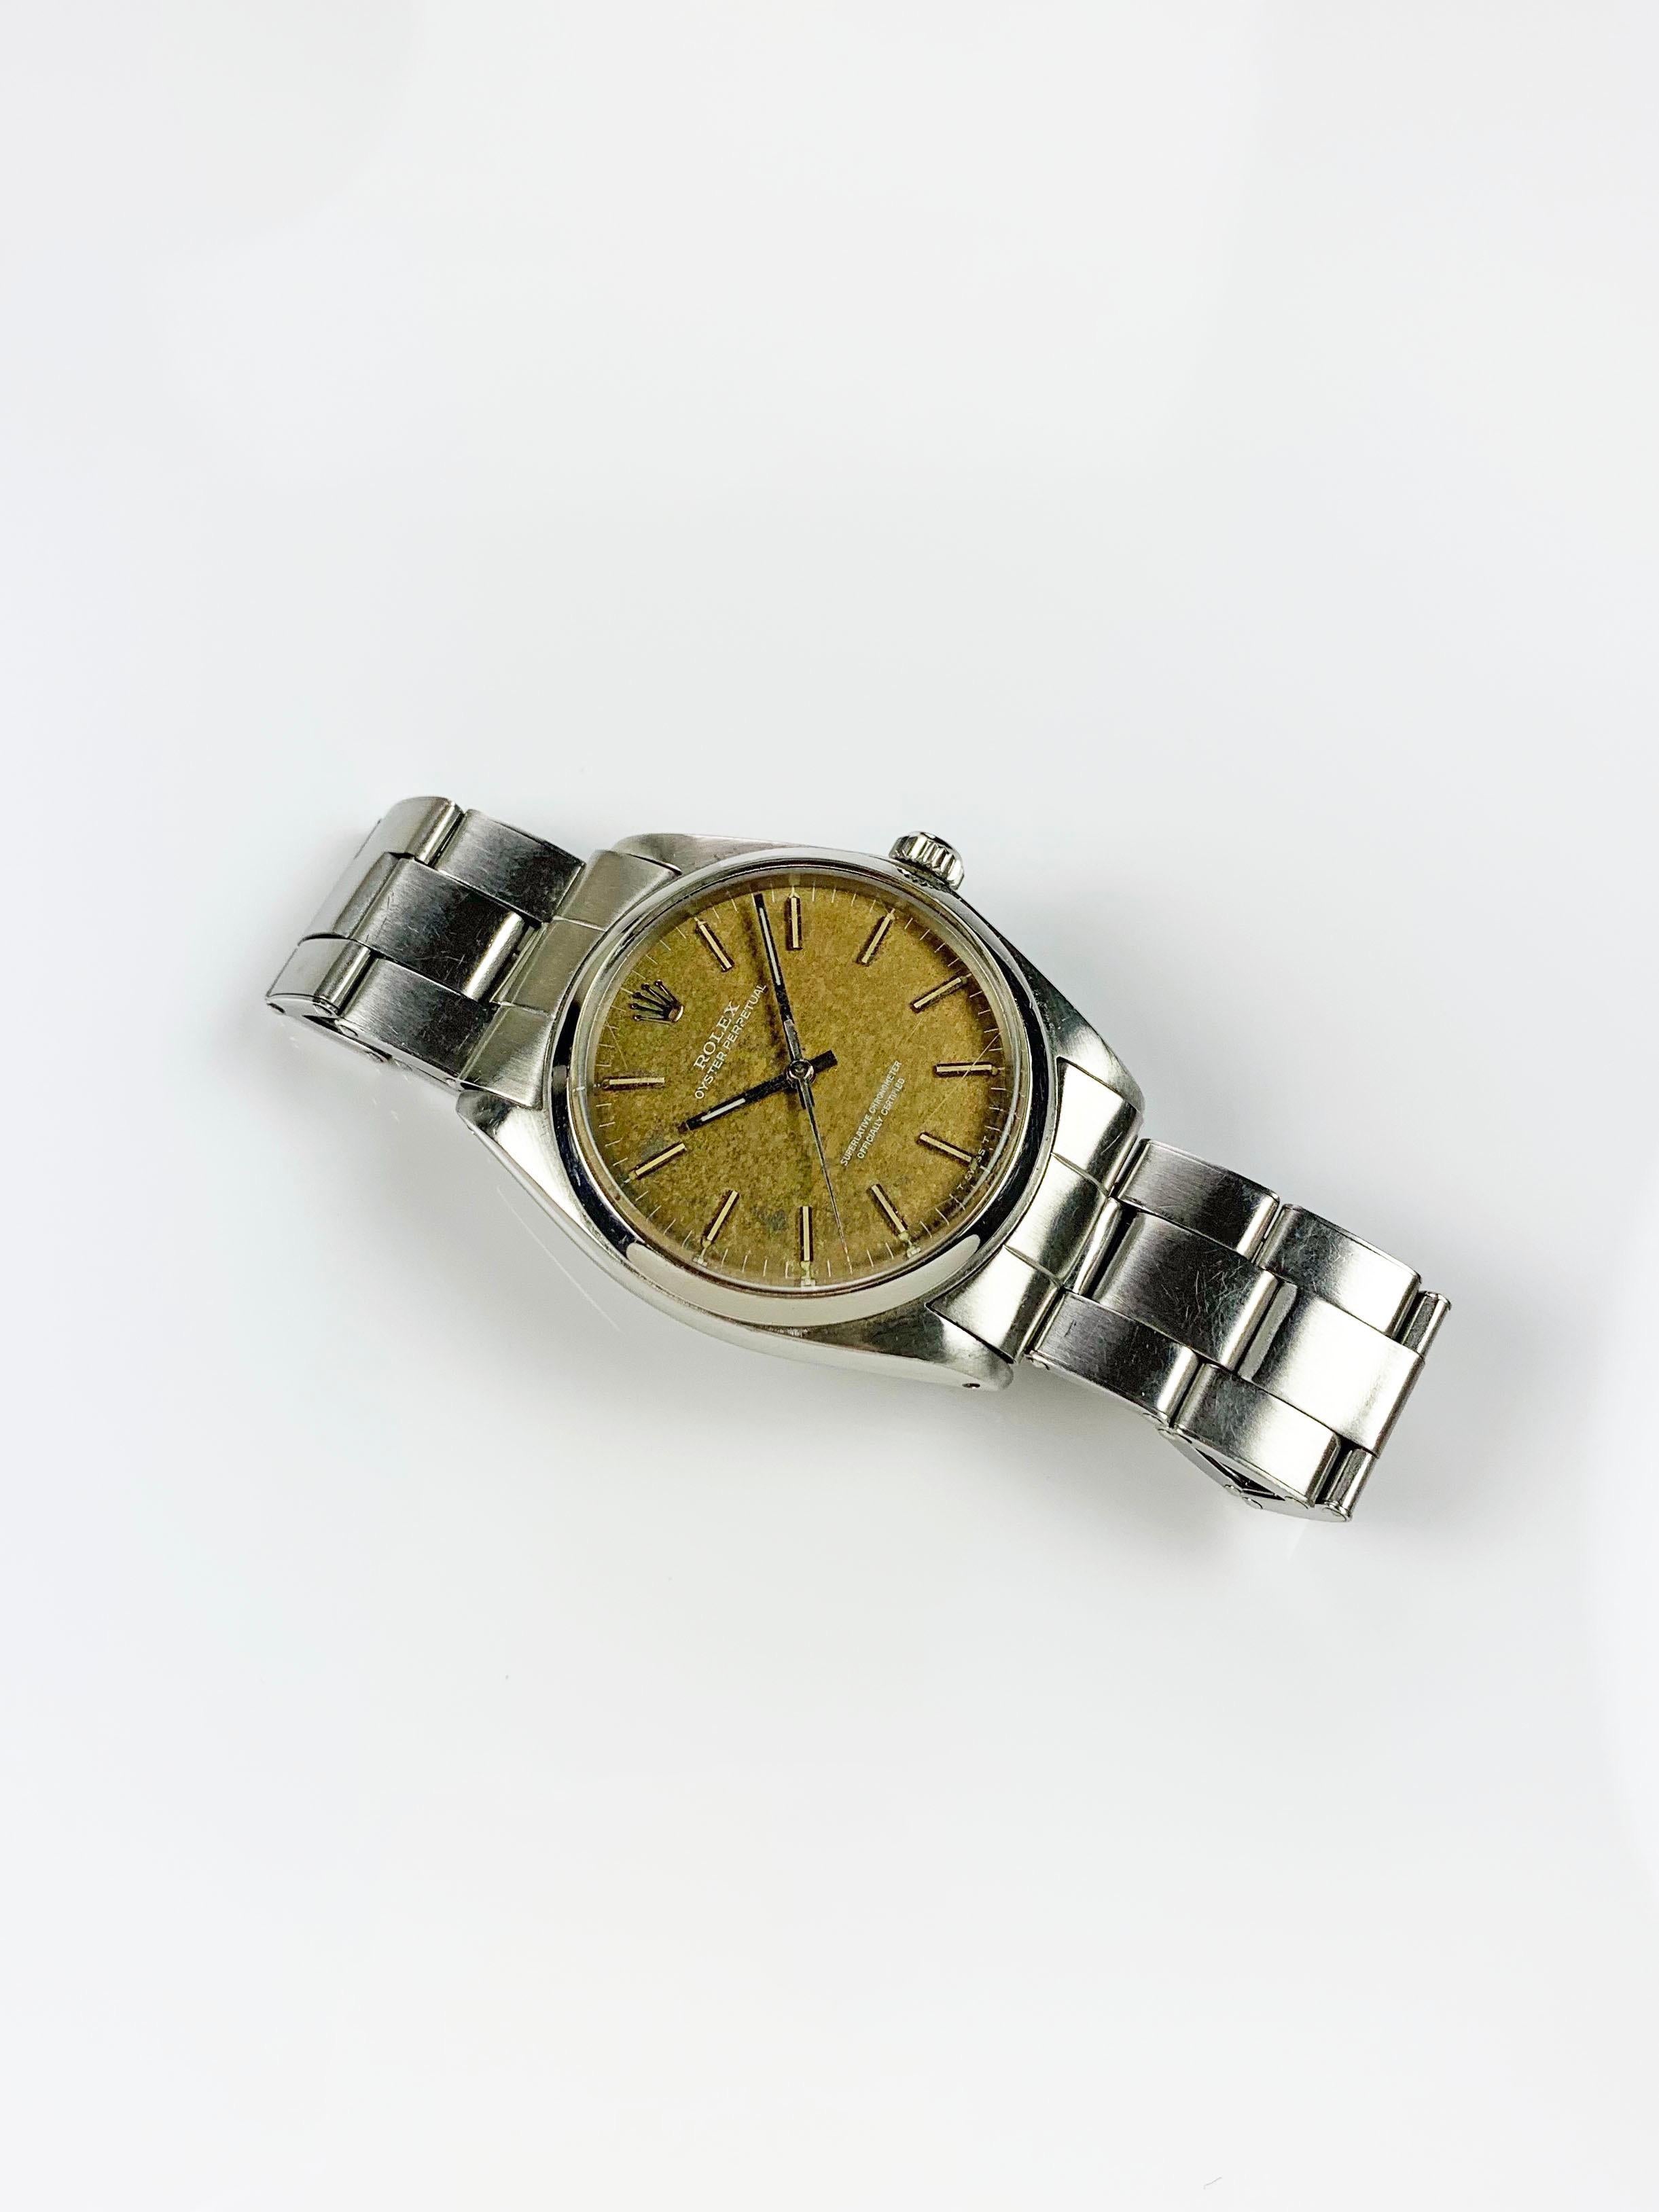 Rolex Stainless Steel Oyster Perpetual Wristwatch
Factory One-Of-A-Kind Tropical Dial
Dial Aged Naturally This Way
Stainless Steel Smooth Bezel
34mm in size 
Rolex Automatic Movement
Acrylic Crystal
1960s Production
Comes Fitted on Original Rolex